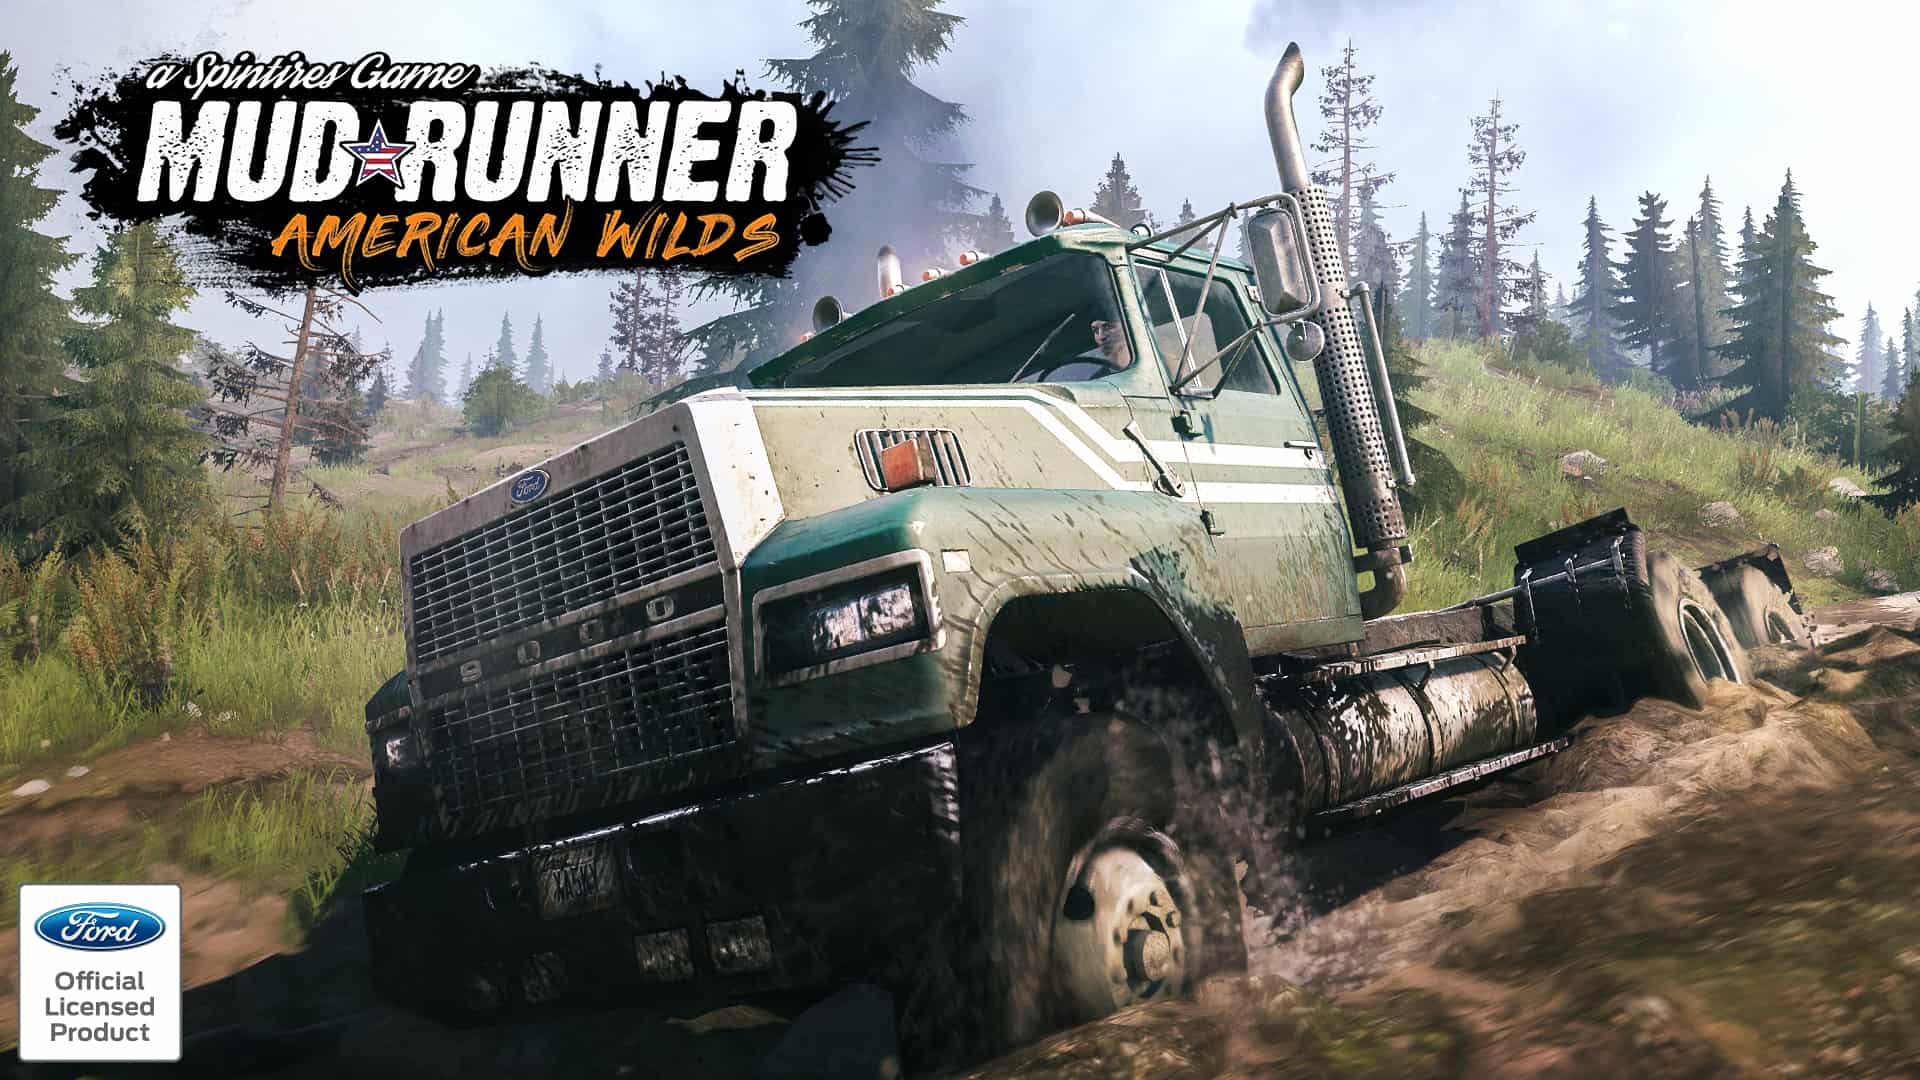 American Wilds Introducing The Ford Ltl9000 Mudrunner Snowrunner Spintires